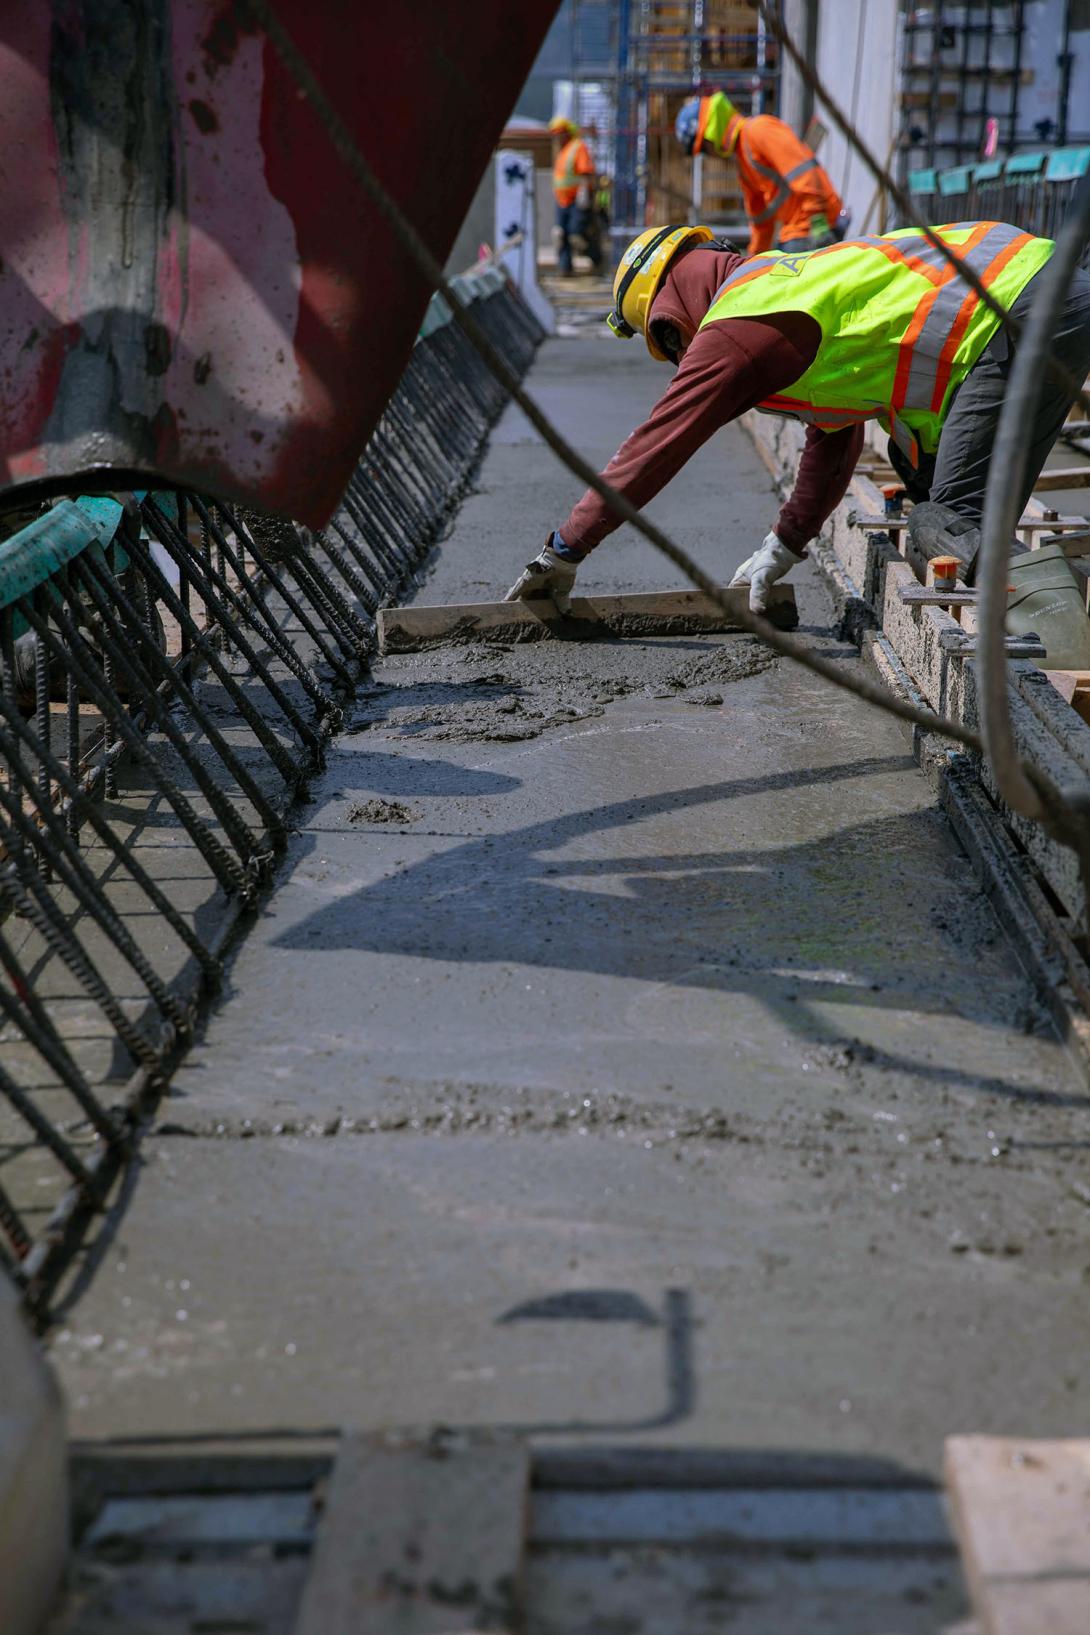 A cement mason uses a screed to level off the freshly placed concrete at the spillway headworks. | June 2023